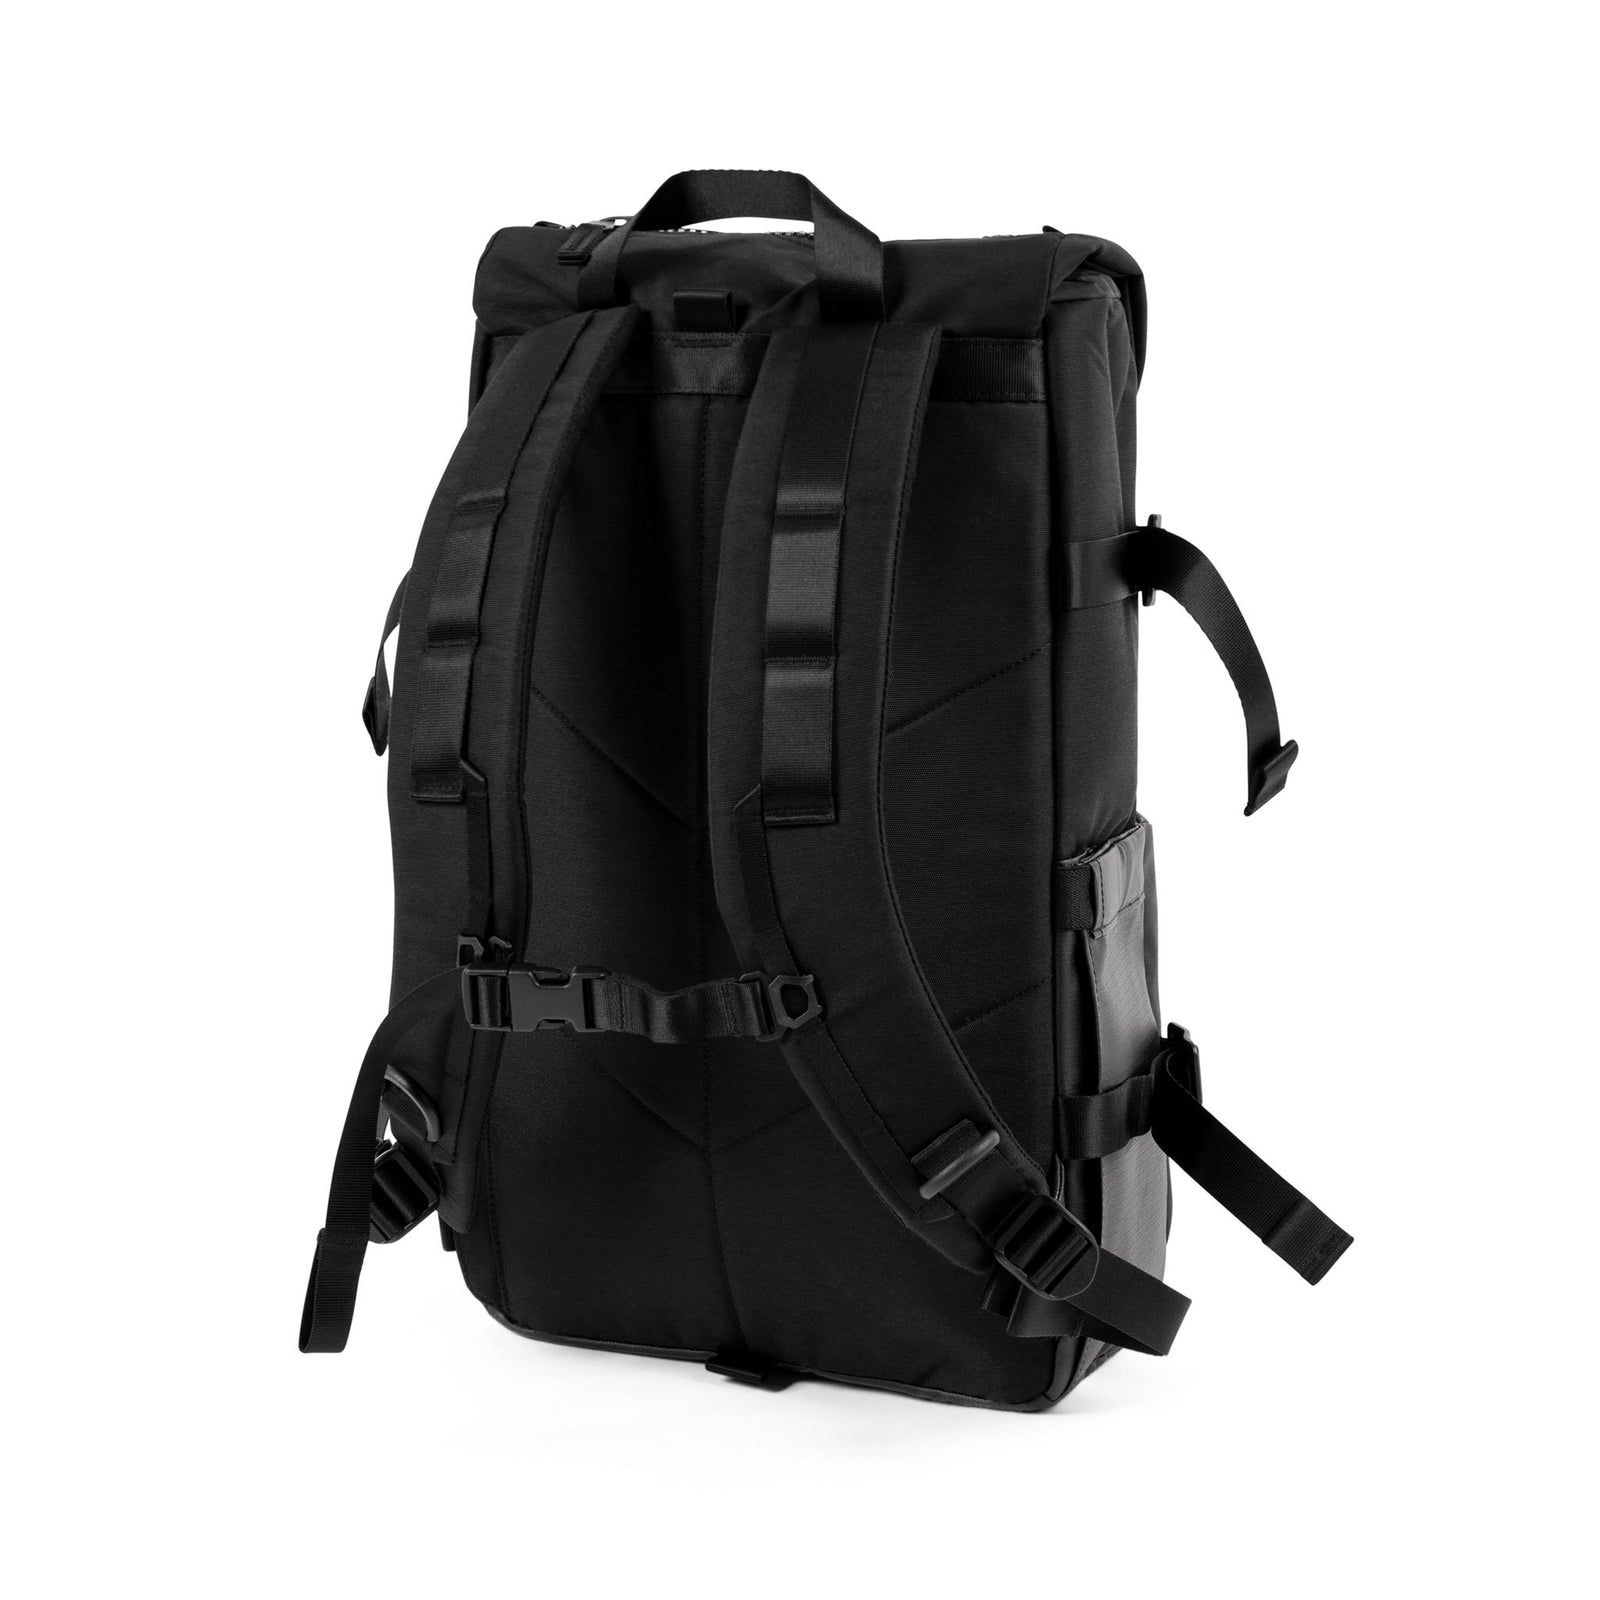 3/4 Back Product Shot of the Topo Designs Rover Pack Premium showing quilted back panel and backpack straps in "Premium Black".